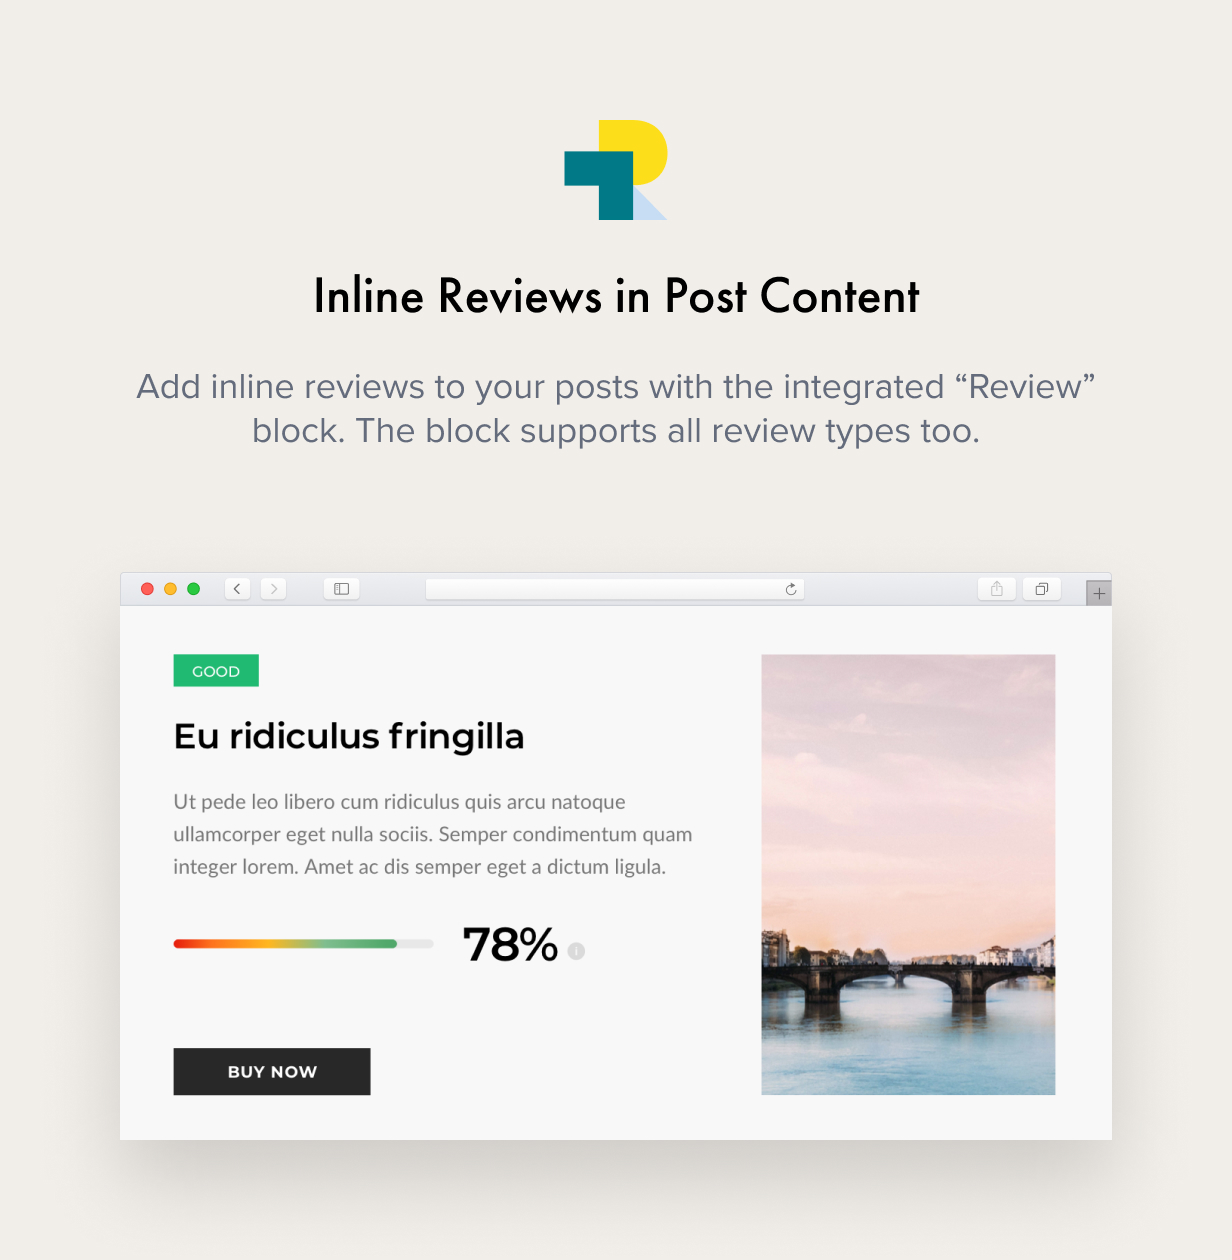 Inline Reviews in Post Content